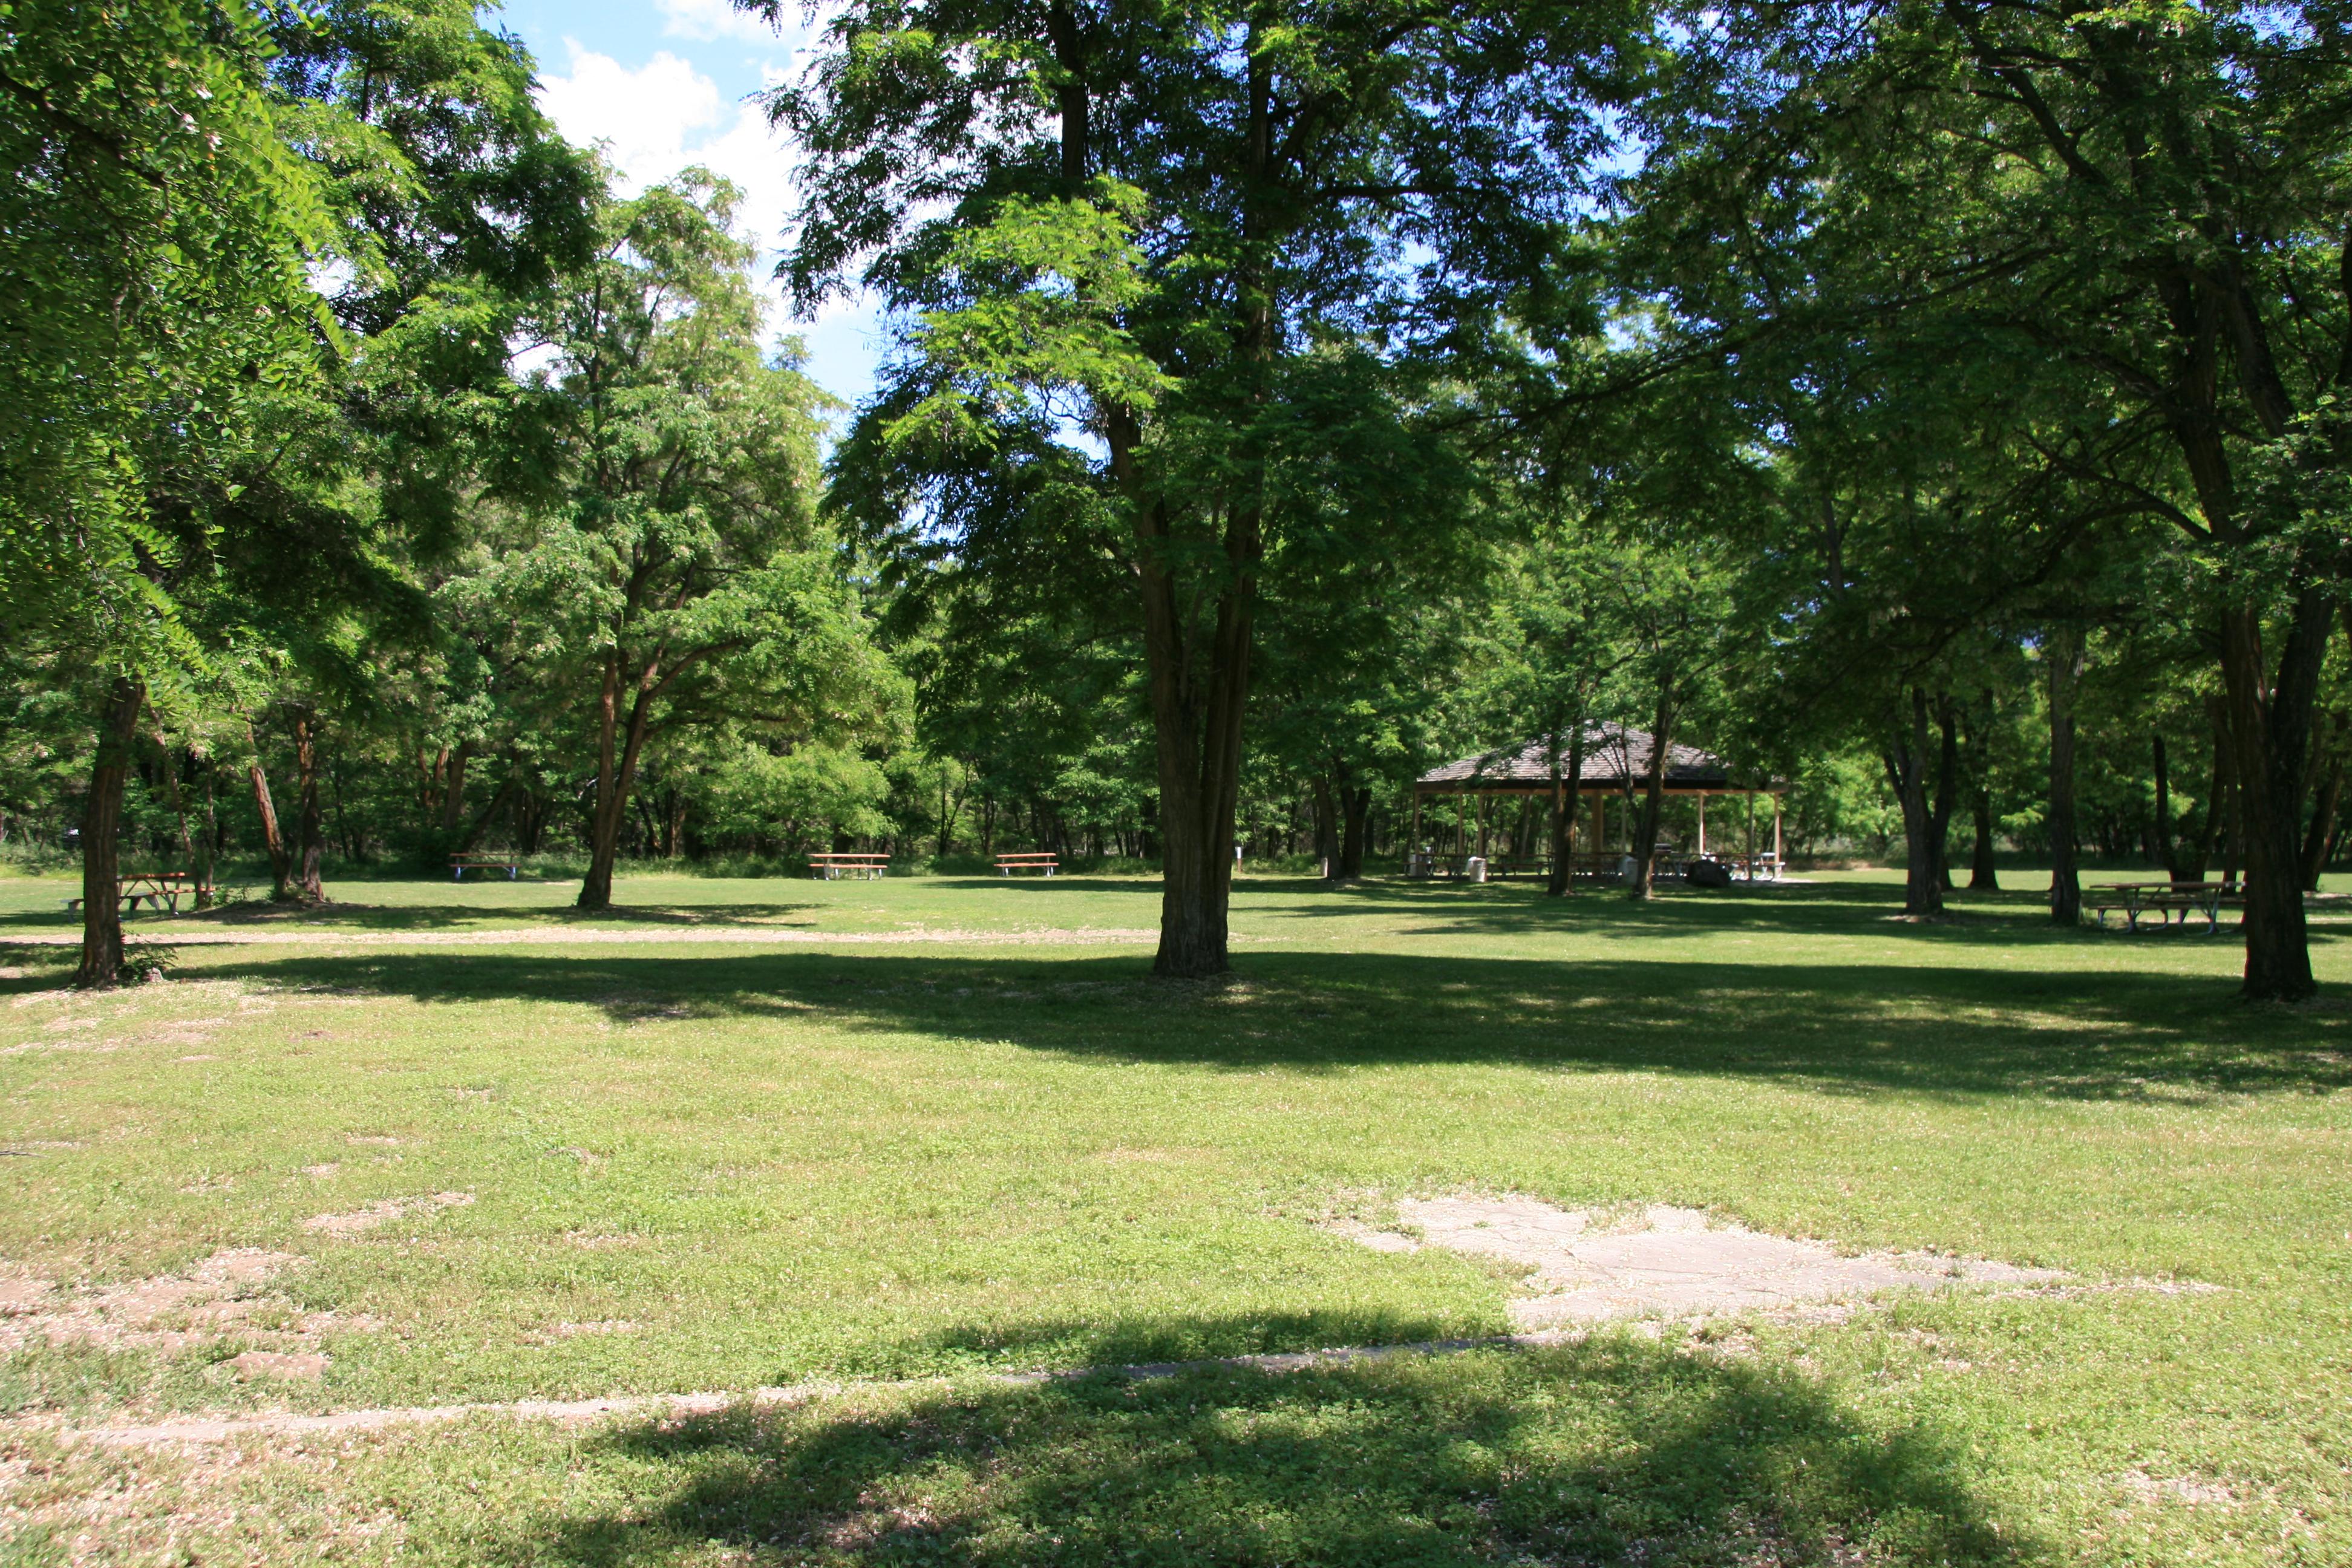 A grassy area with picnic tables and a gazebo beyond.